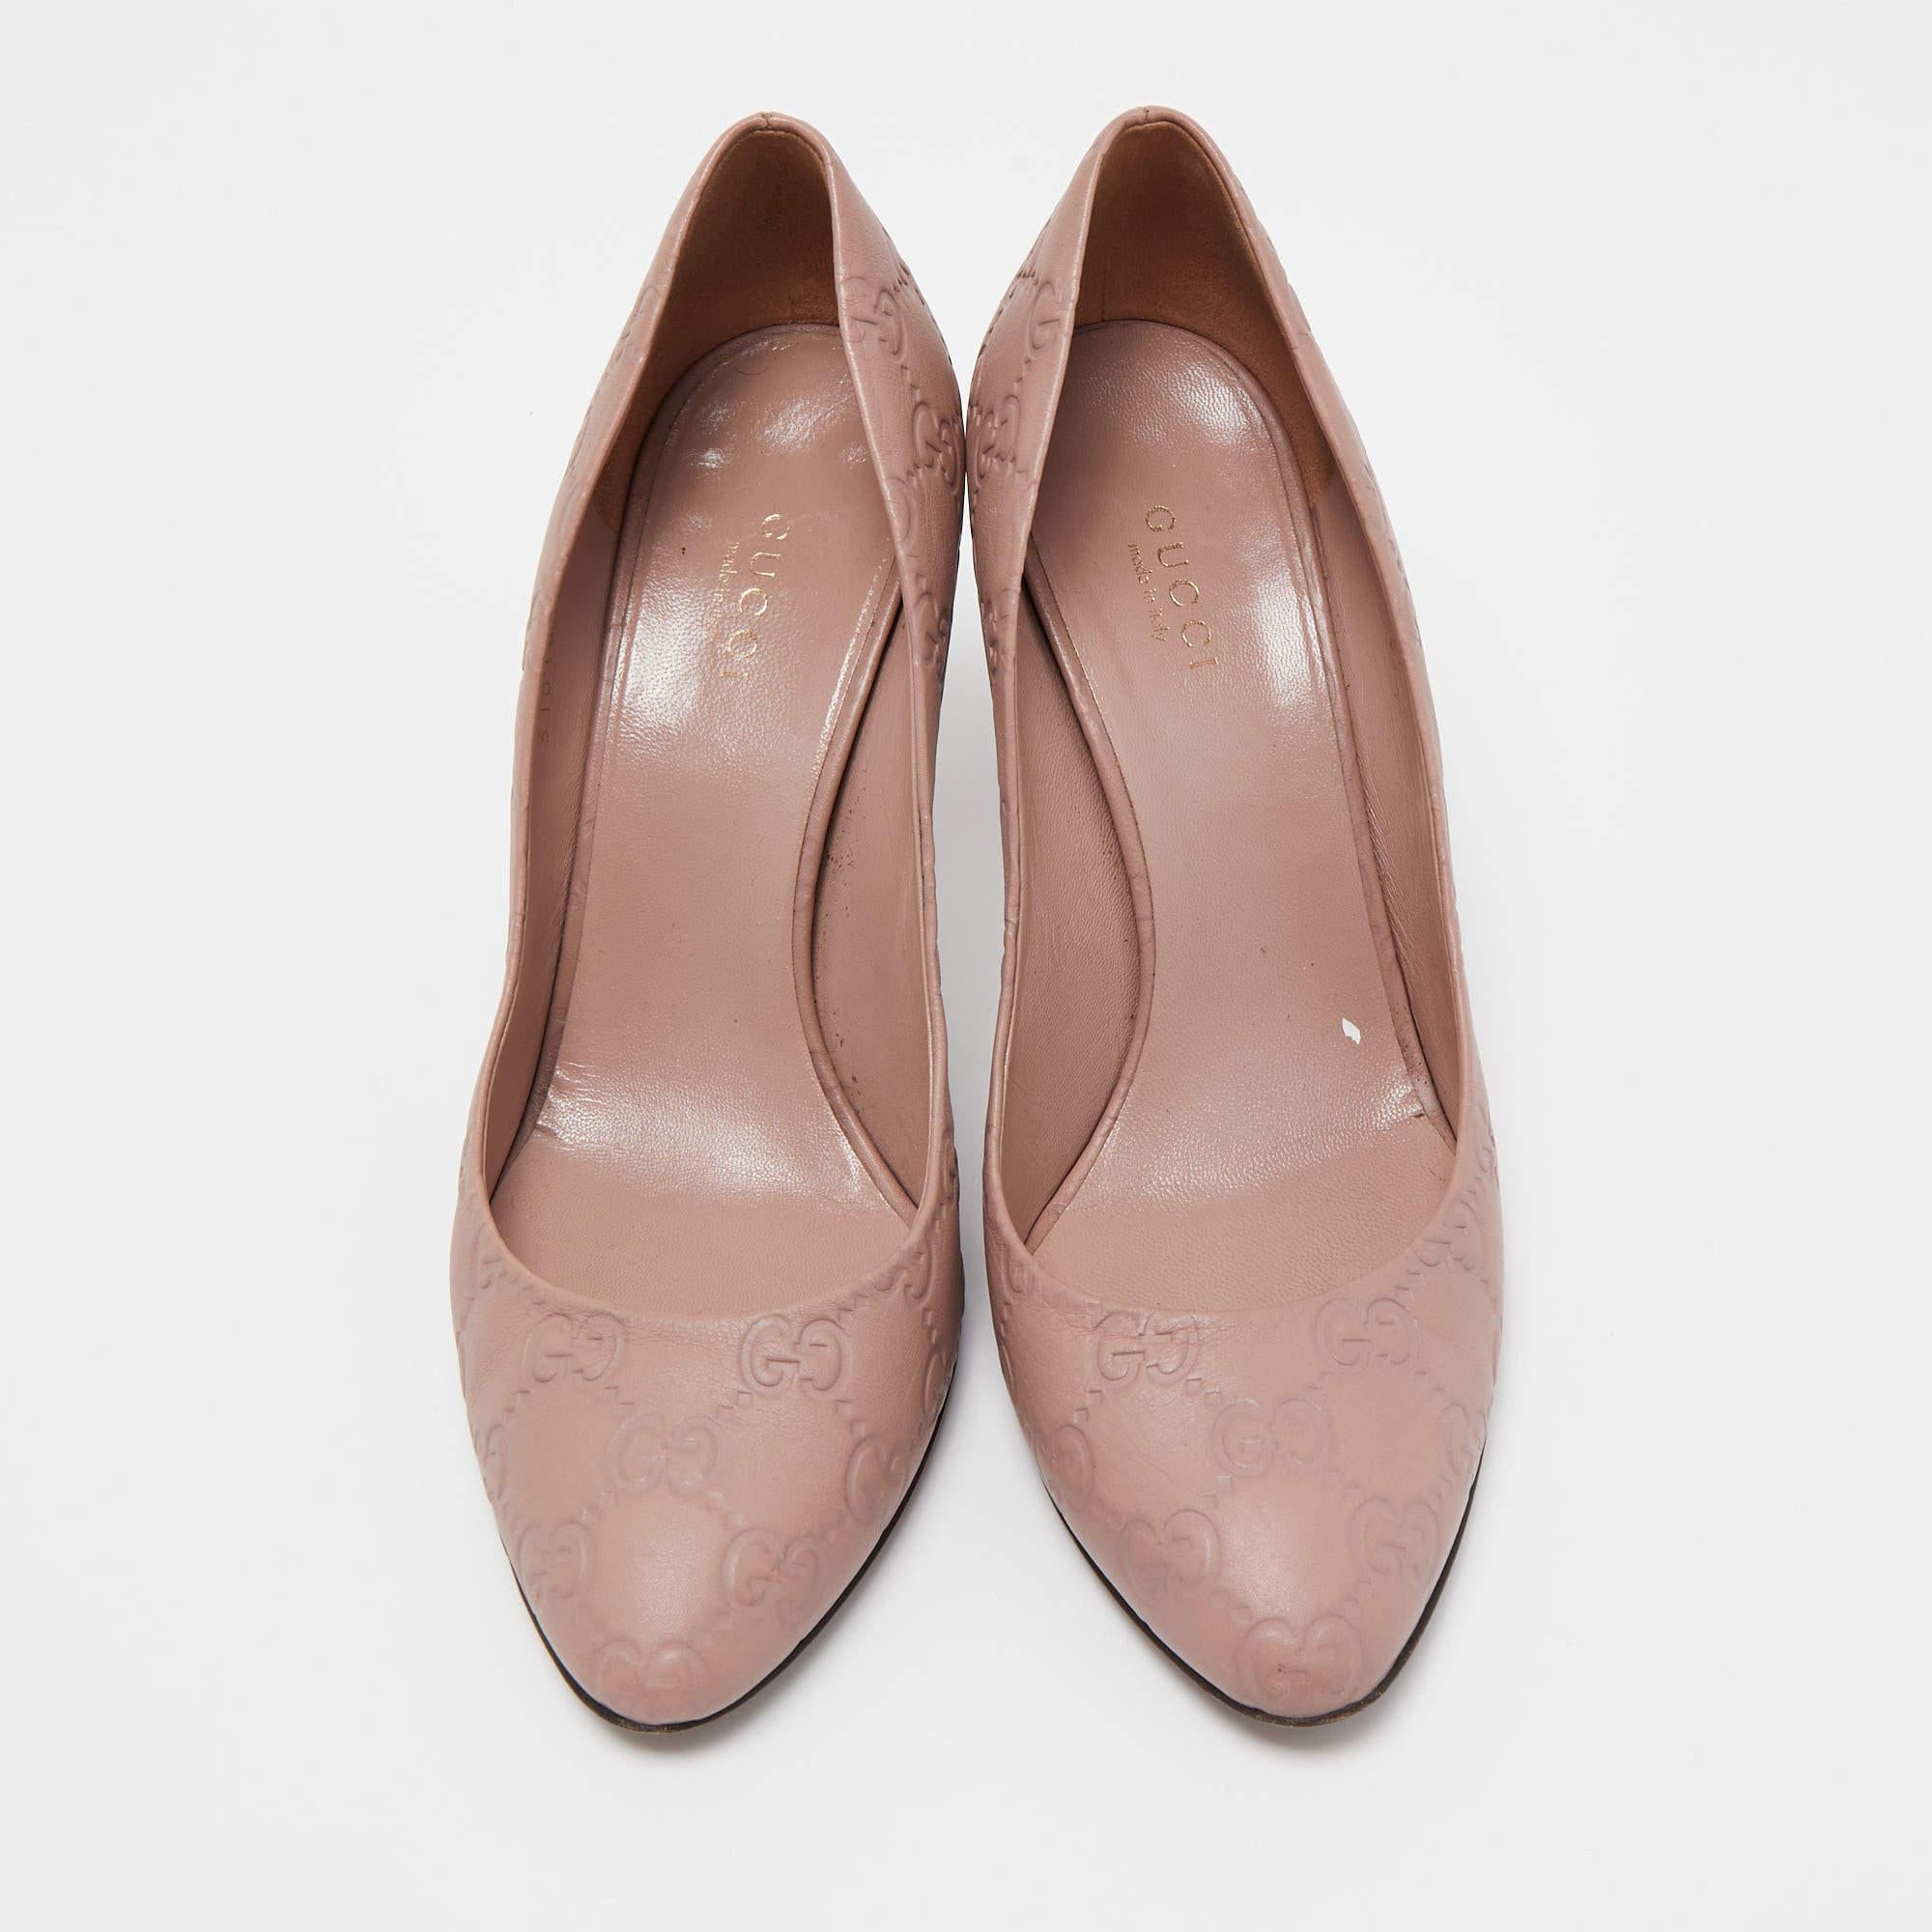 Brown Gucci Dusty Pink Guccissima Leather Horsebit Adina Pumps Size 37.5